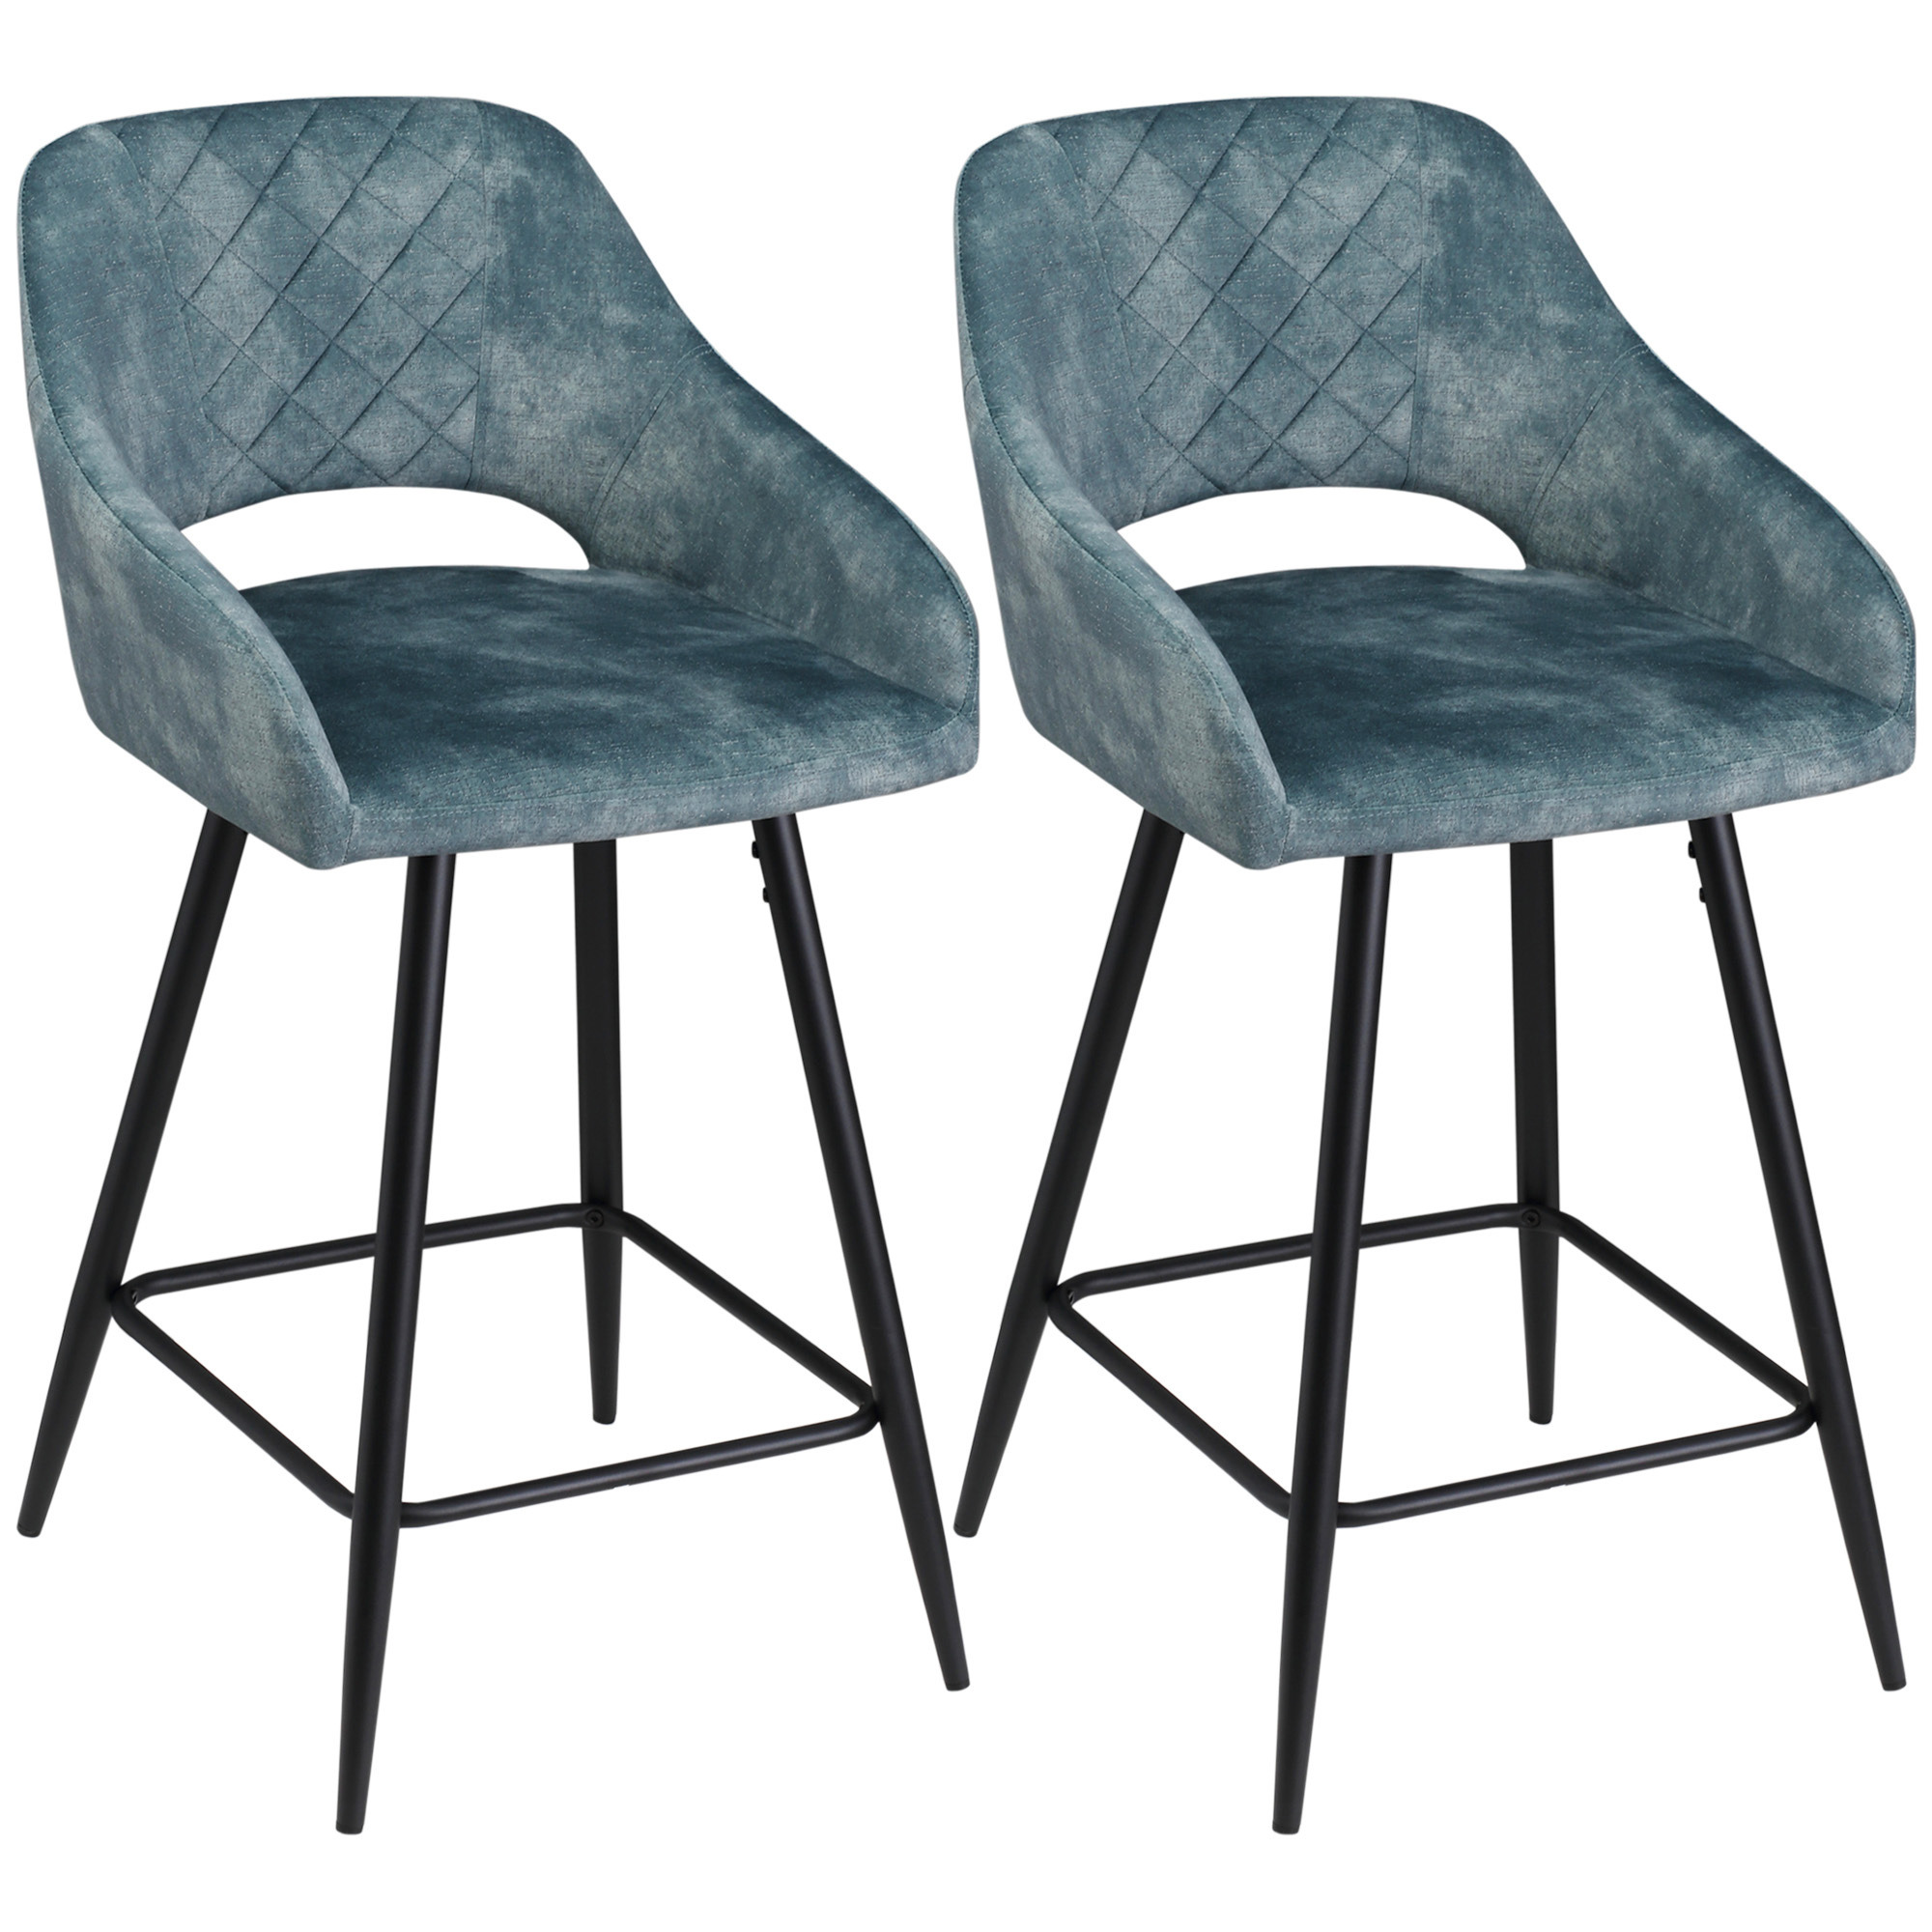 HOMCOM Bar Stools Set of 2, Velvet-Touch Fabric Counter Height Bar Chairs, Kitchen Stools with Steel Legs for Dining Area Blue